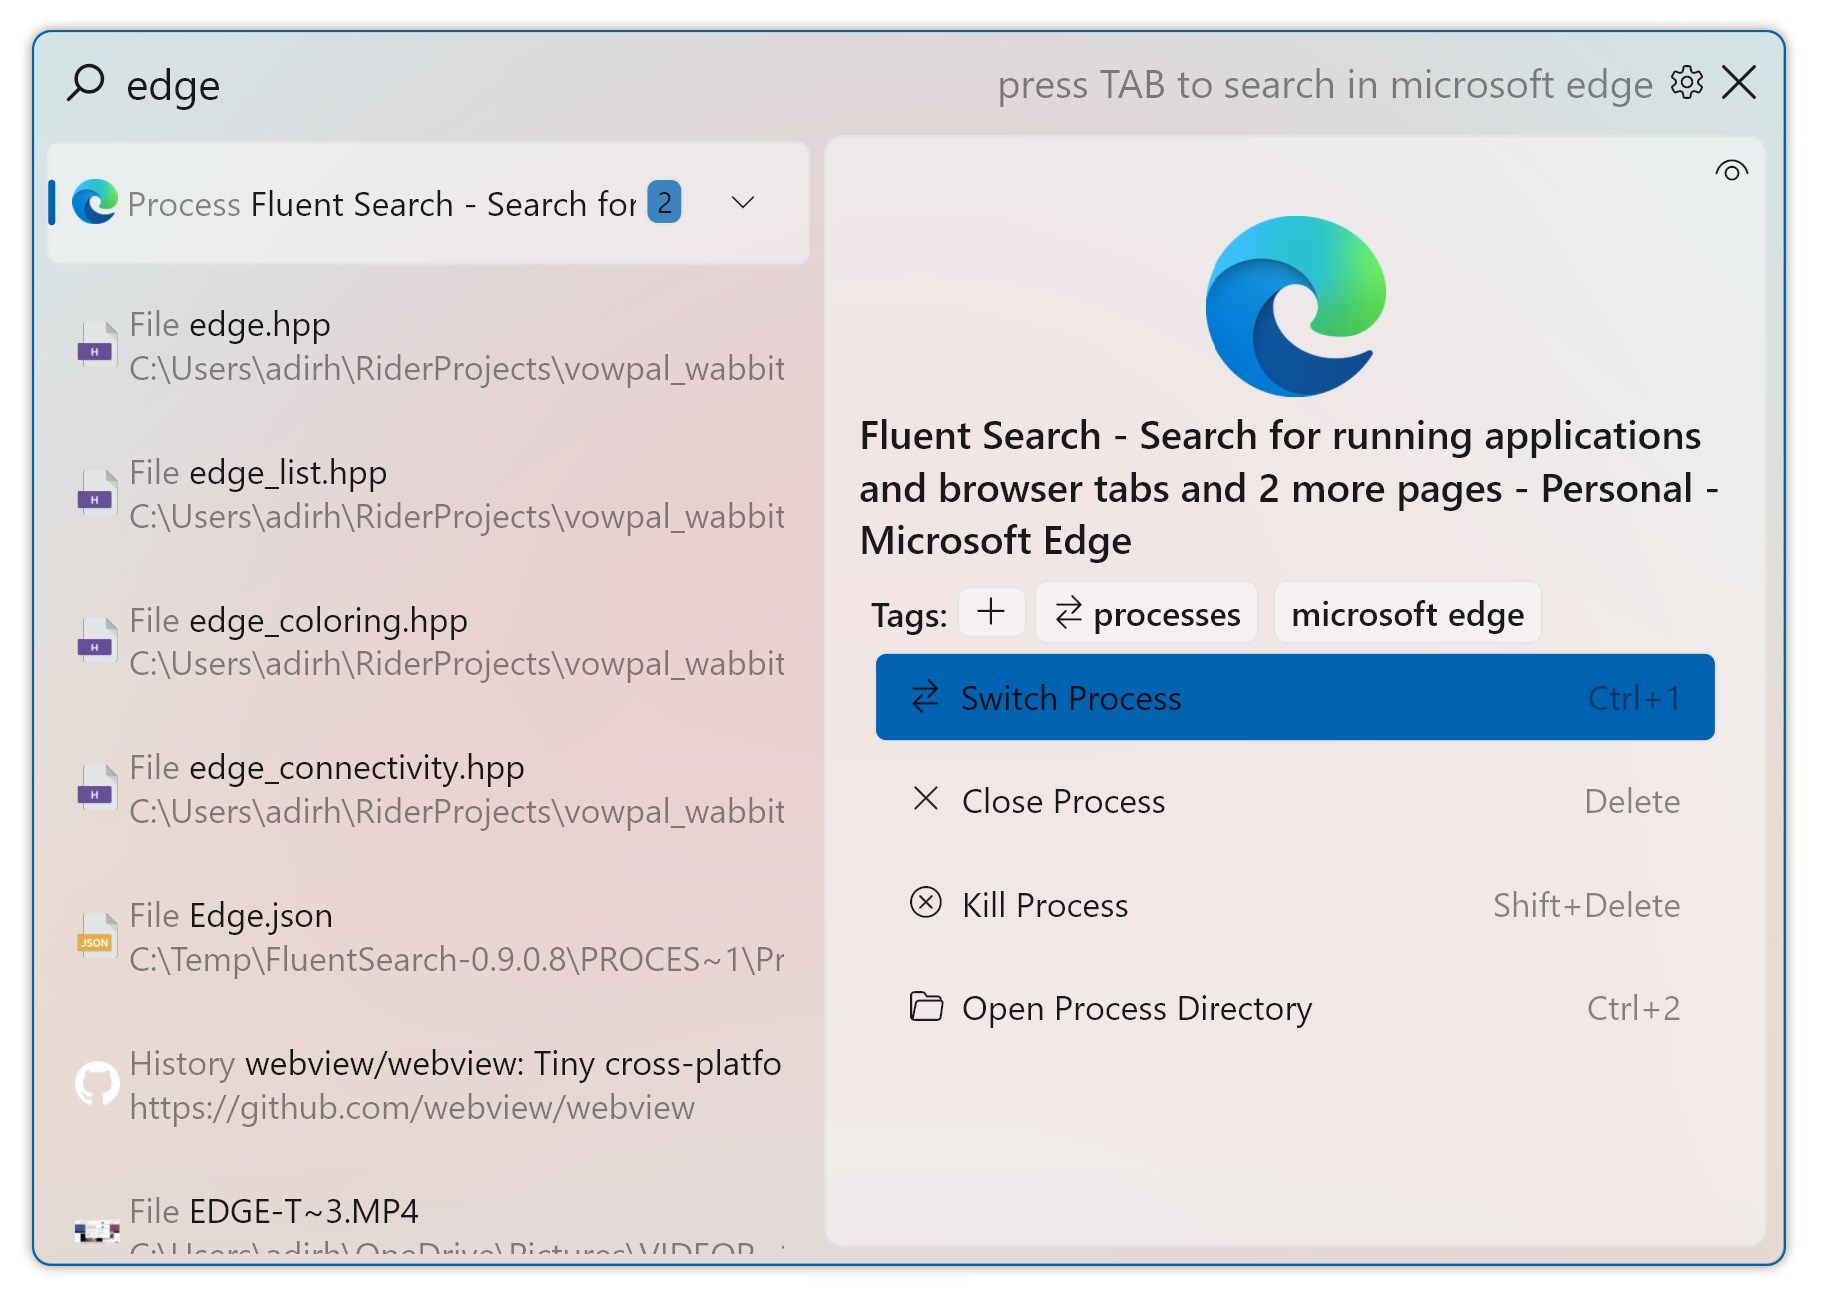 Fluent Search main window - shows open applications